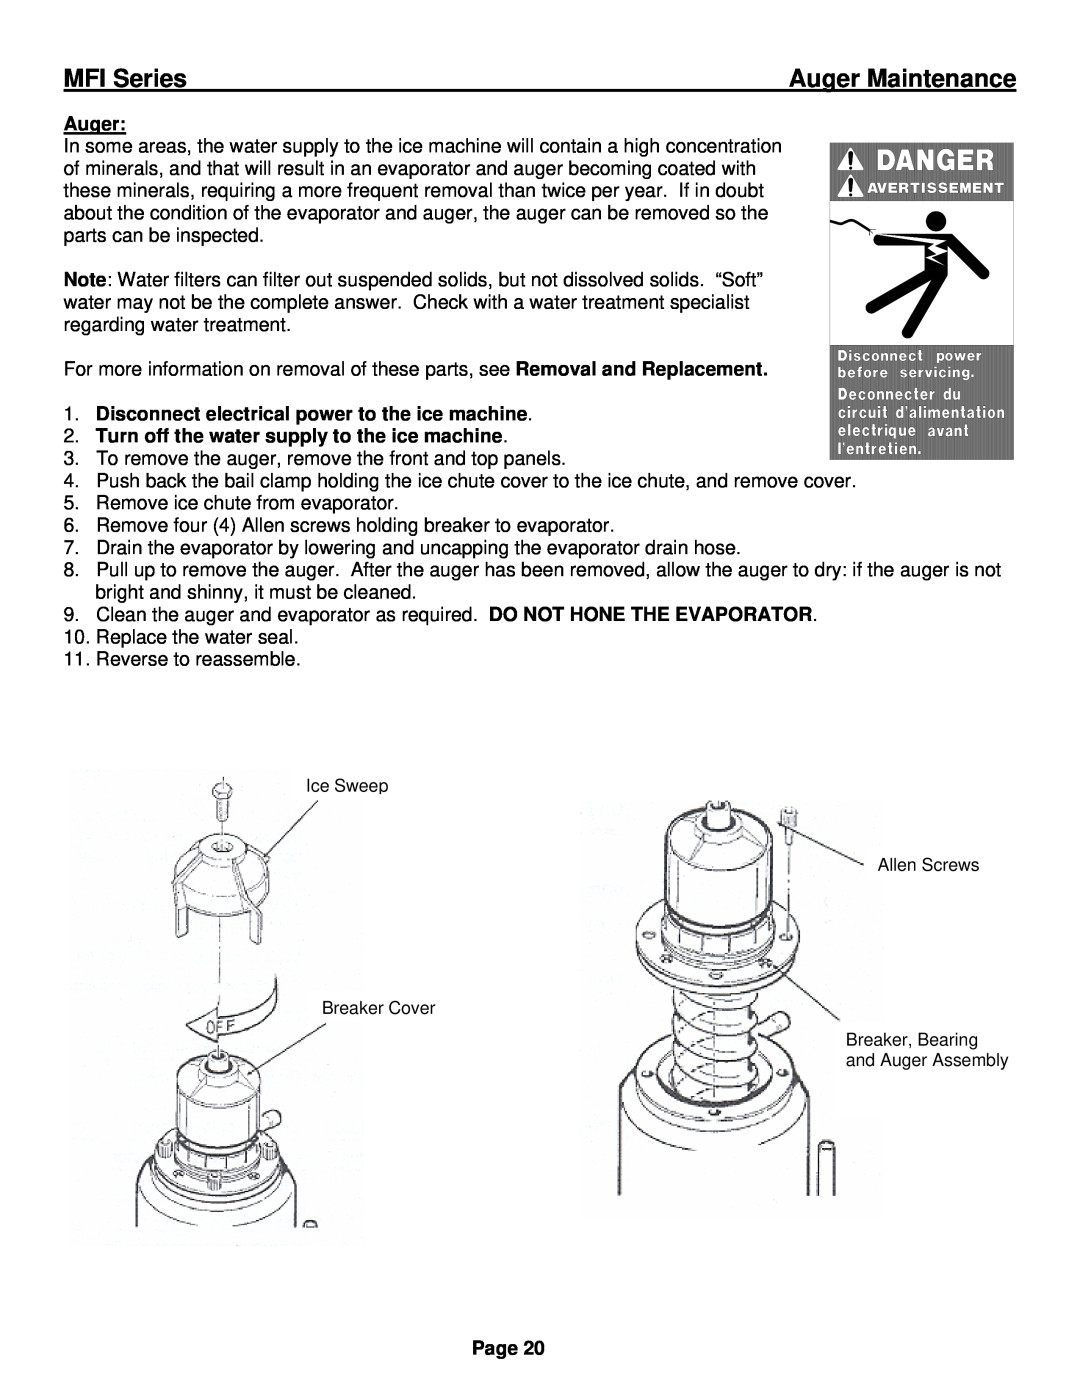 Ice-O-Matic installation manual Auger Maintenance, Disconnect electrical power to the ice machine, MFI Series, Page 